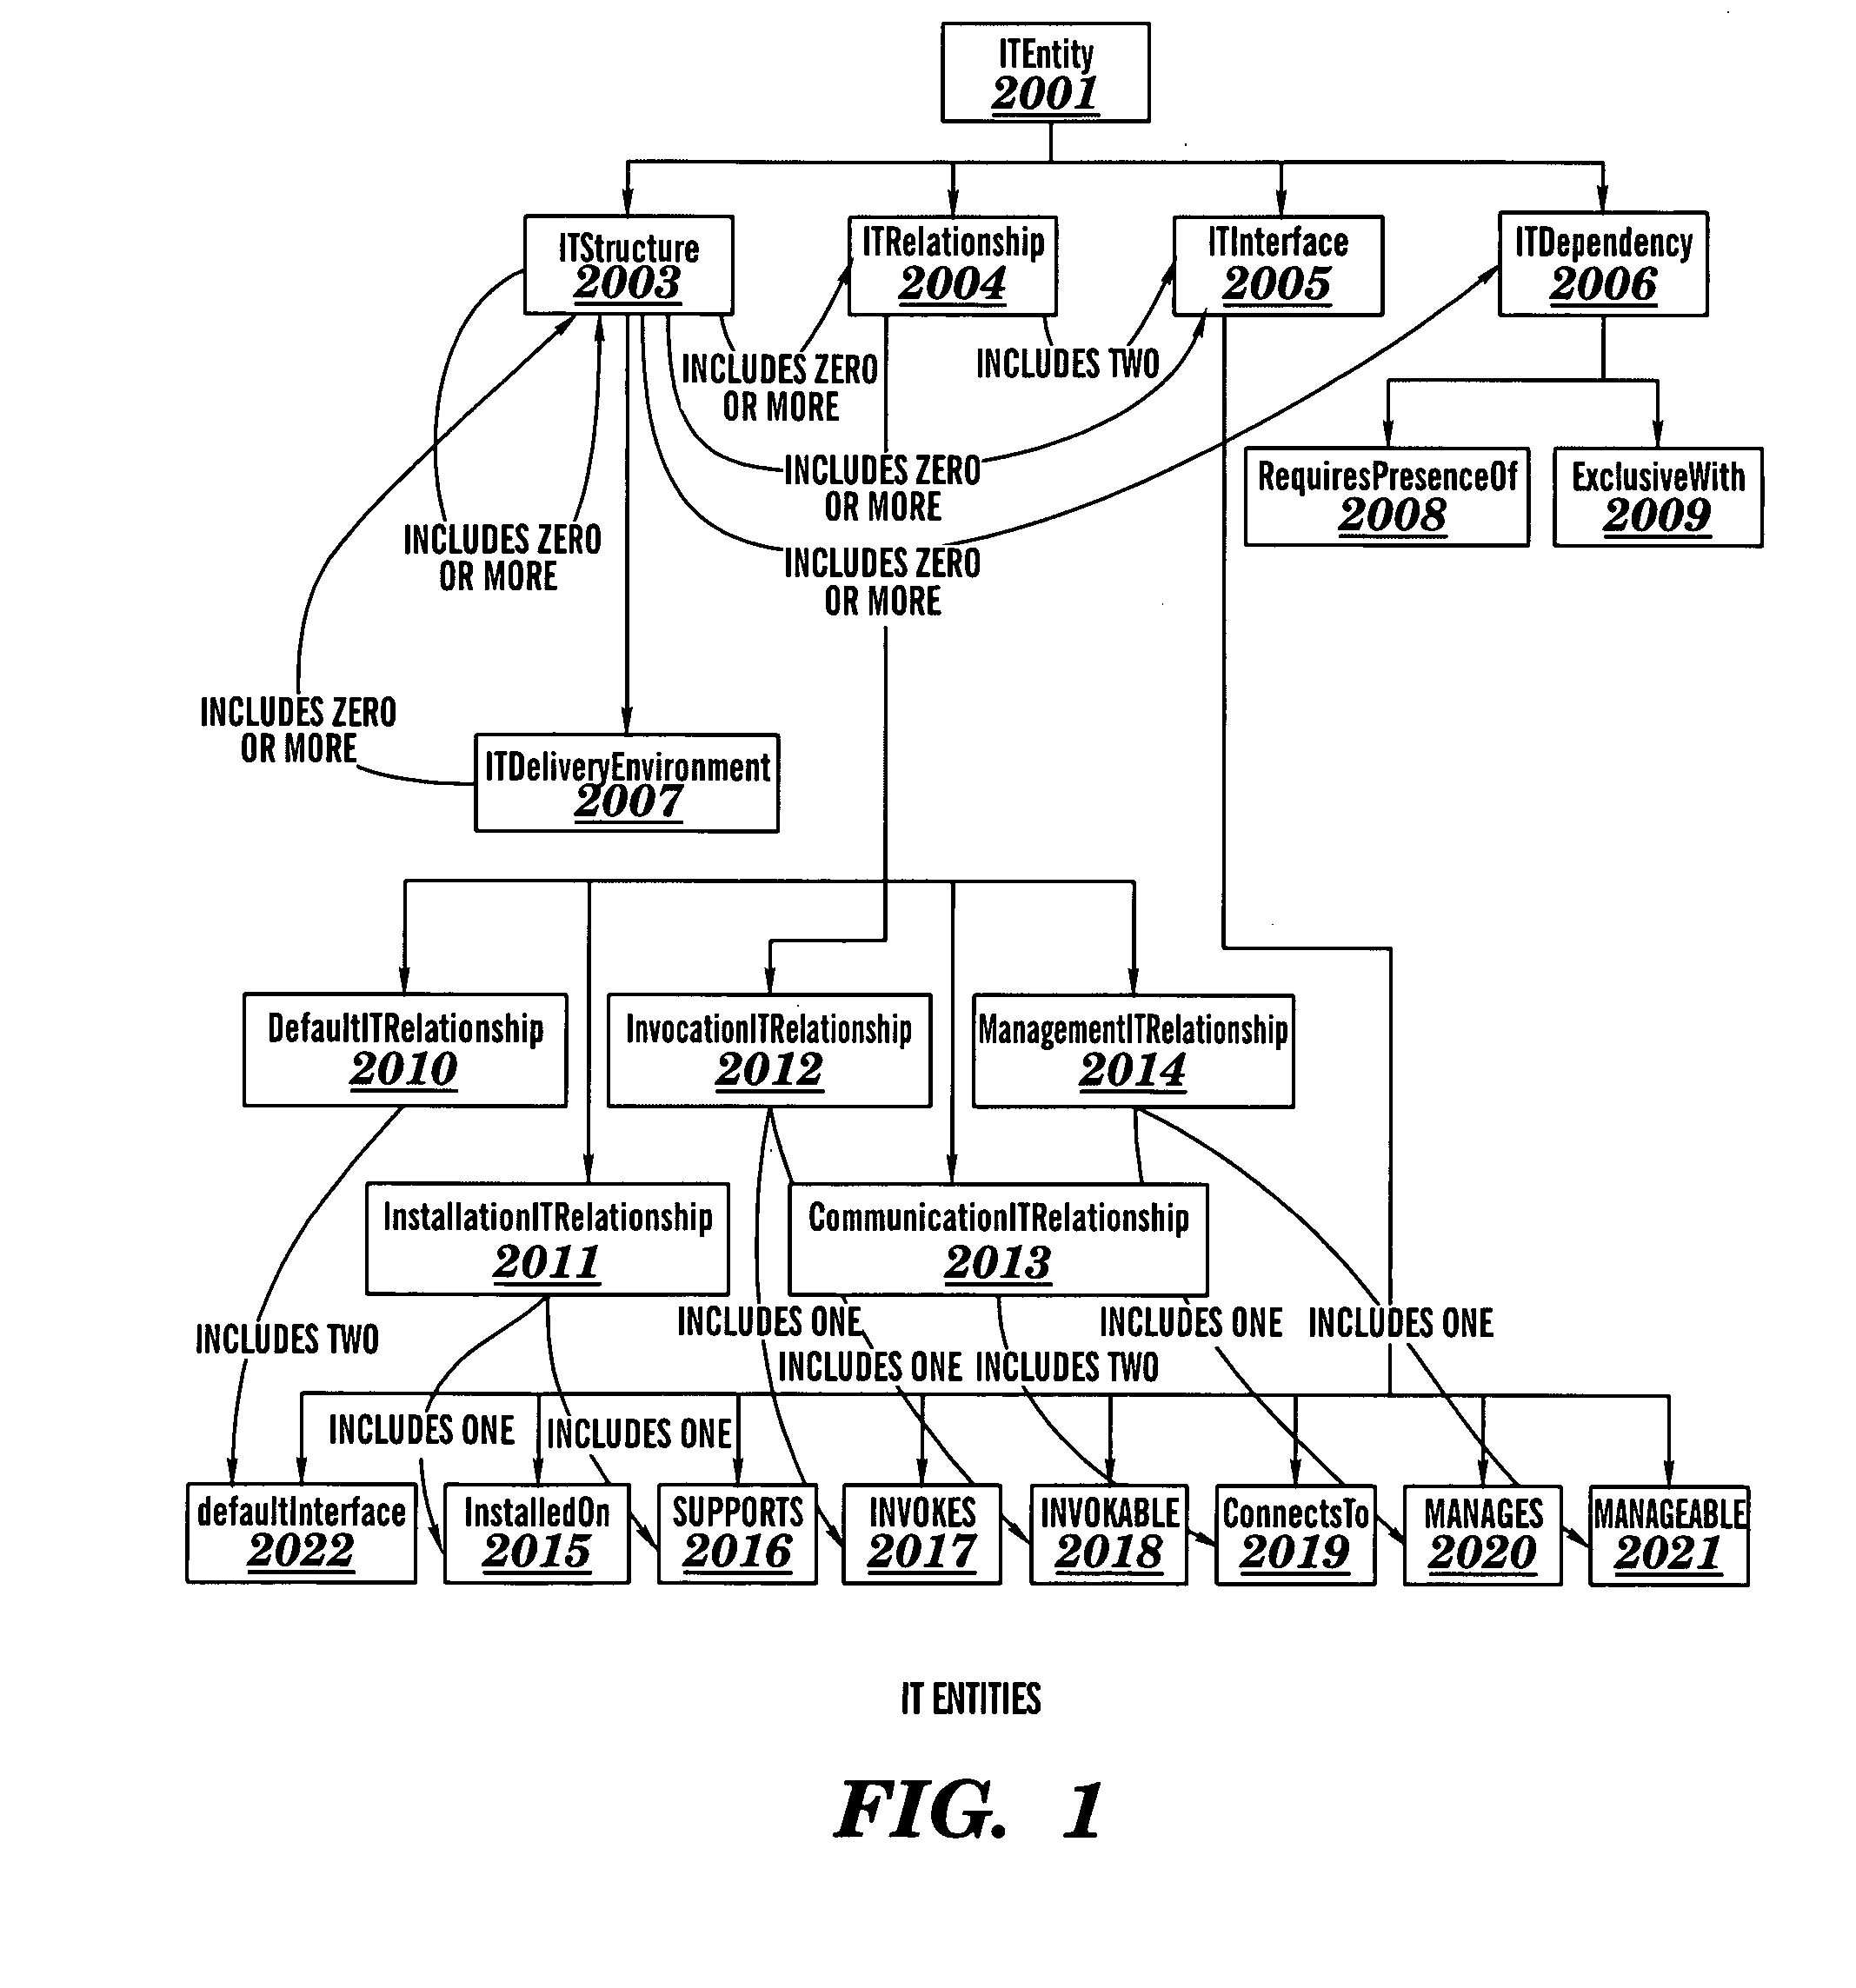 Coupling of a business component model to an information technology model